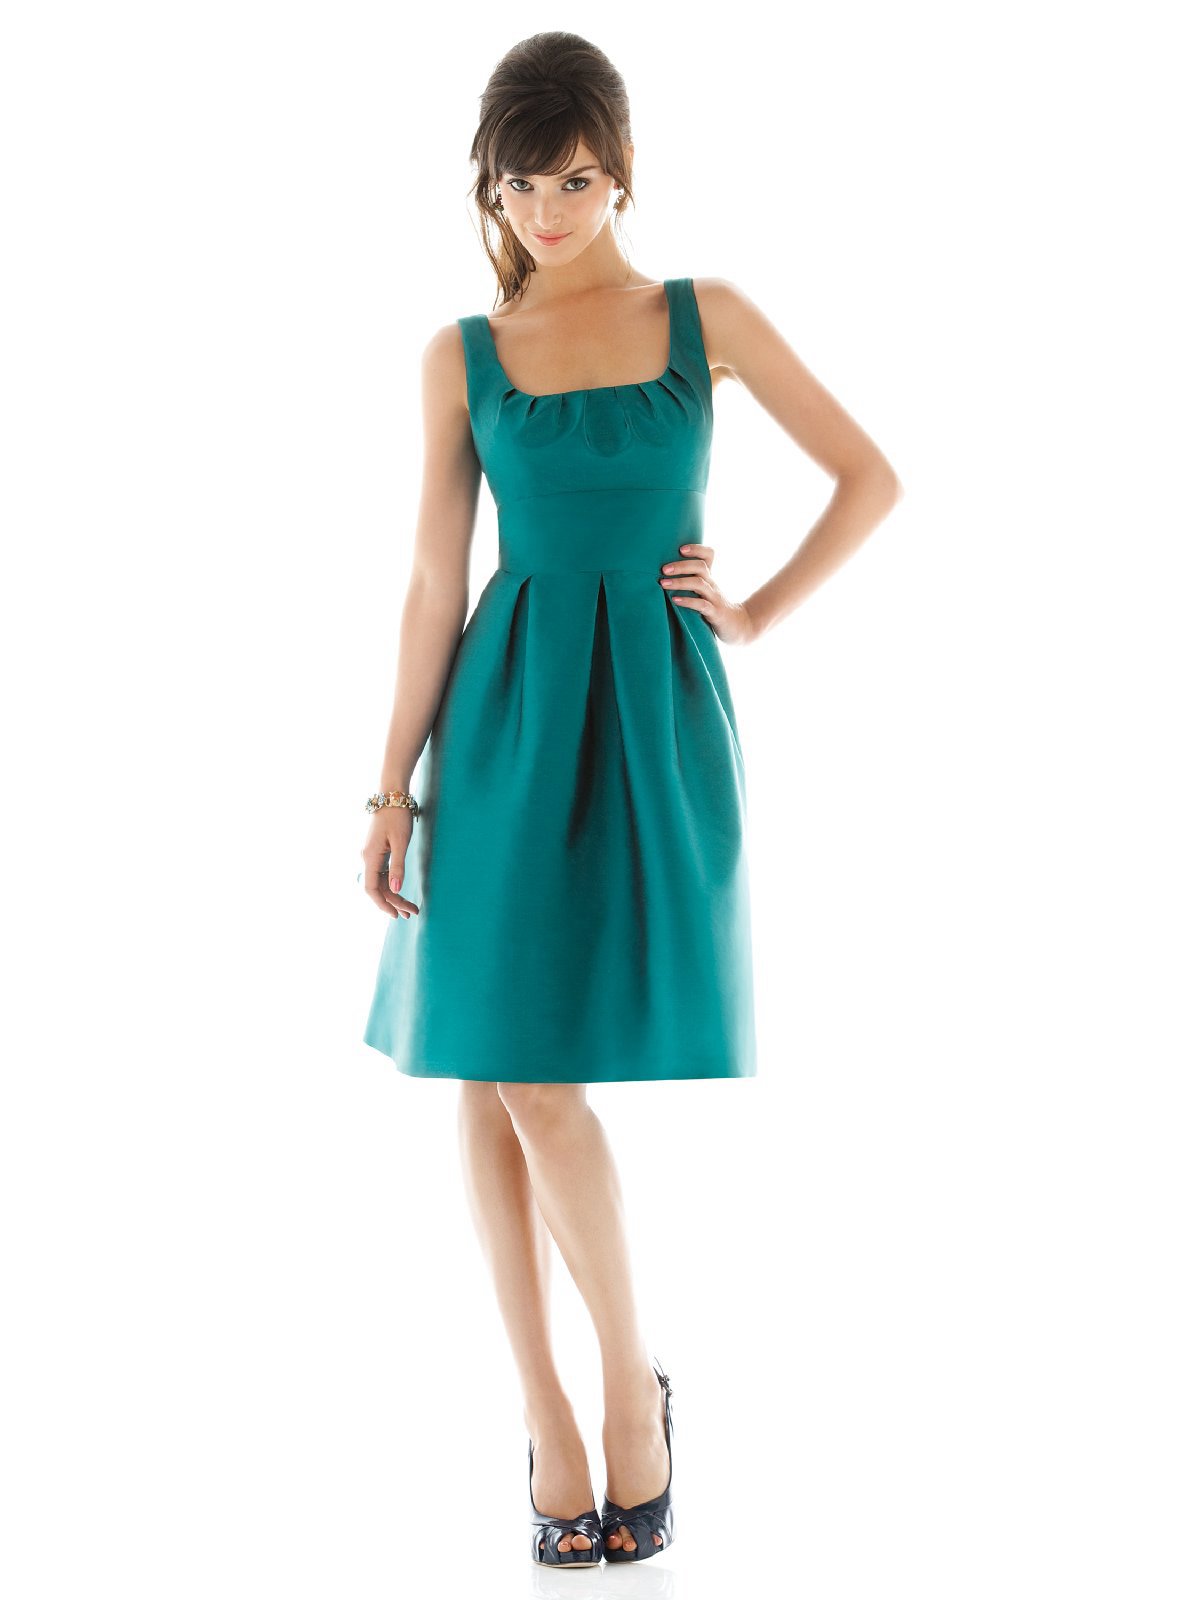 Teal A Line Square Neck Knee Length Satin Prom Dresses With Draped Skirt 